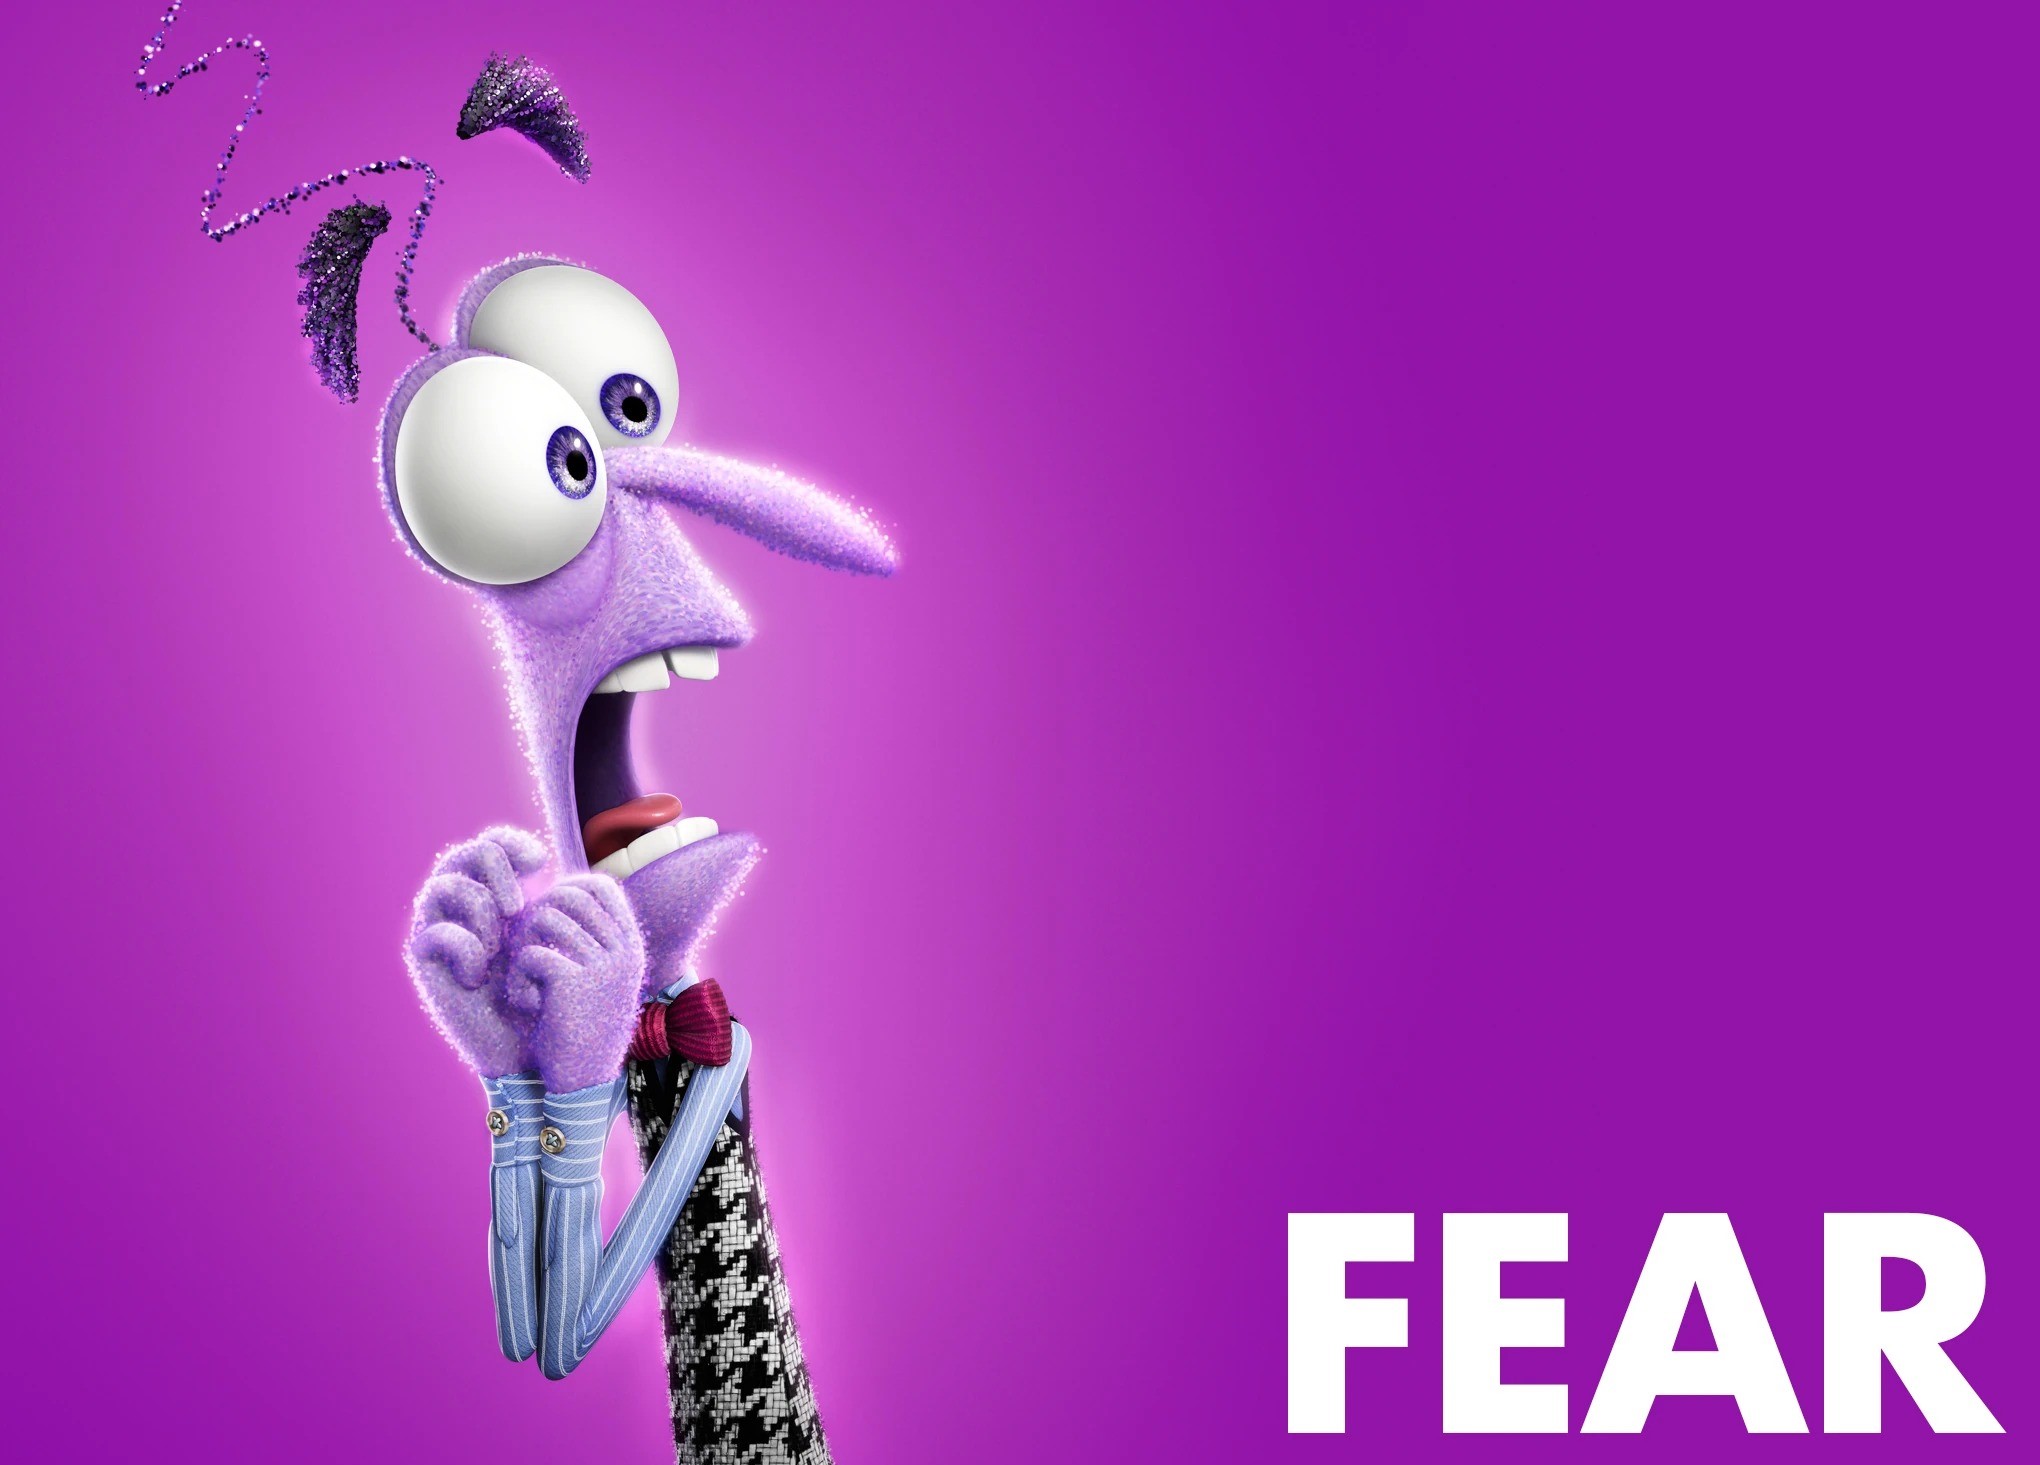 16 Facts About Fear (Inside Out) - Facts.net